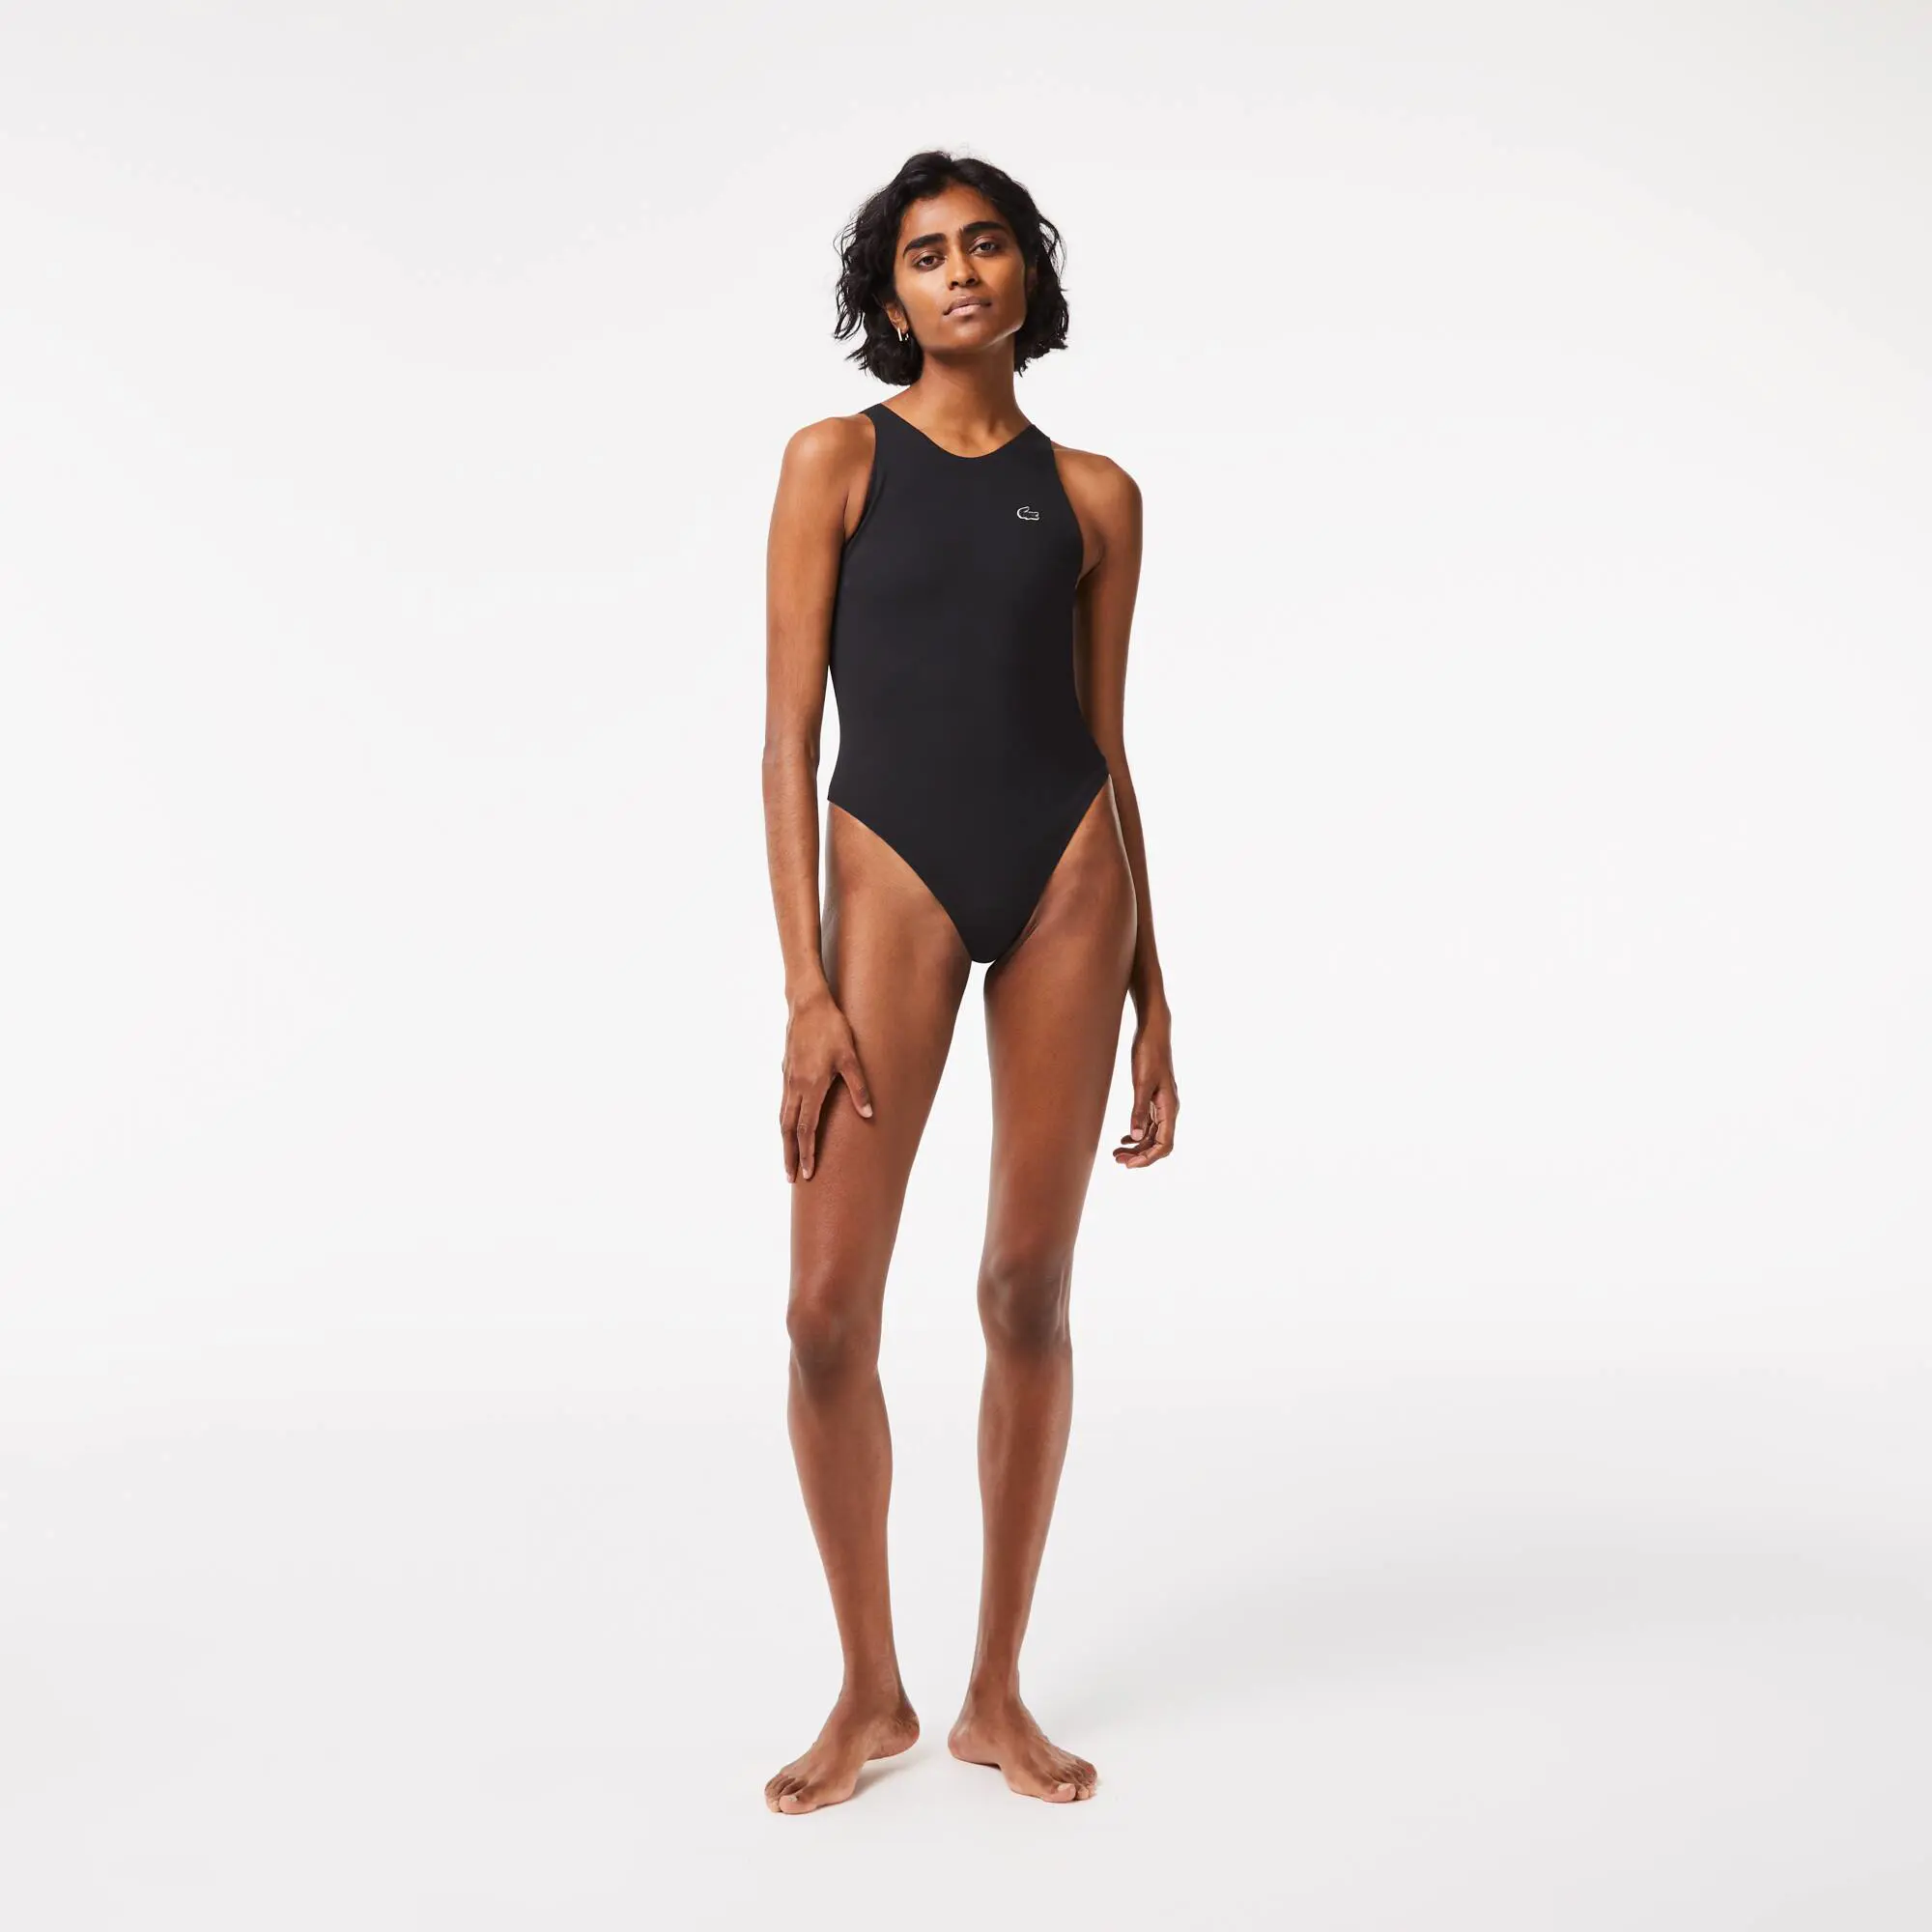 Lacoste Women’s Lacoste One-Piece Recycled Polyamide Swimsuit. 1